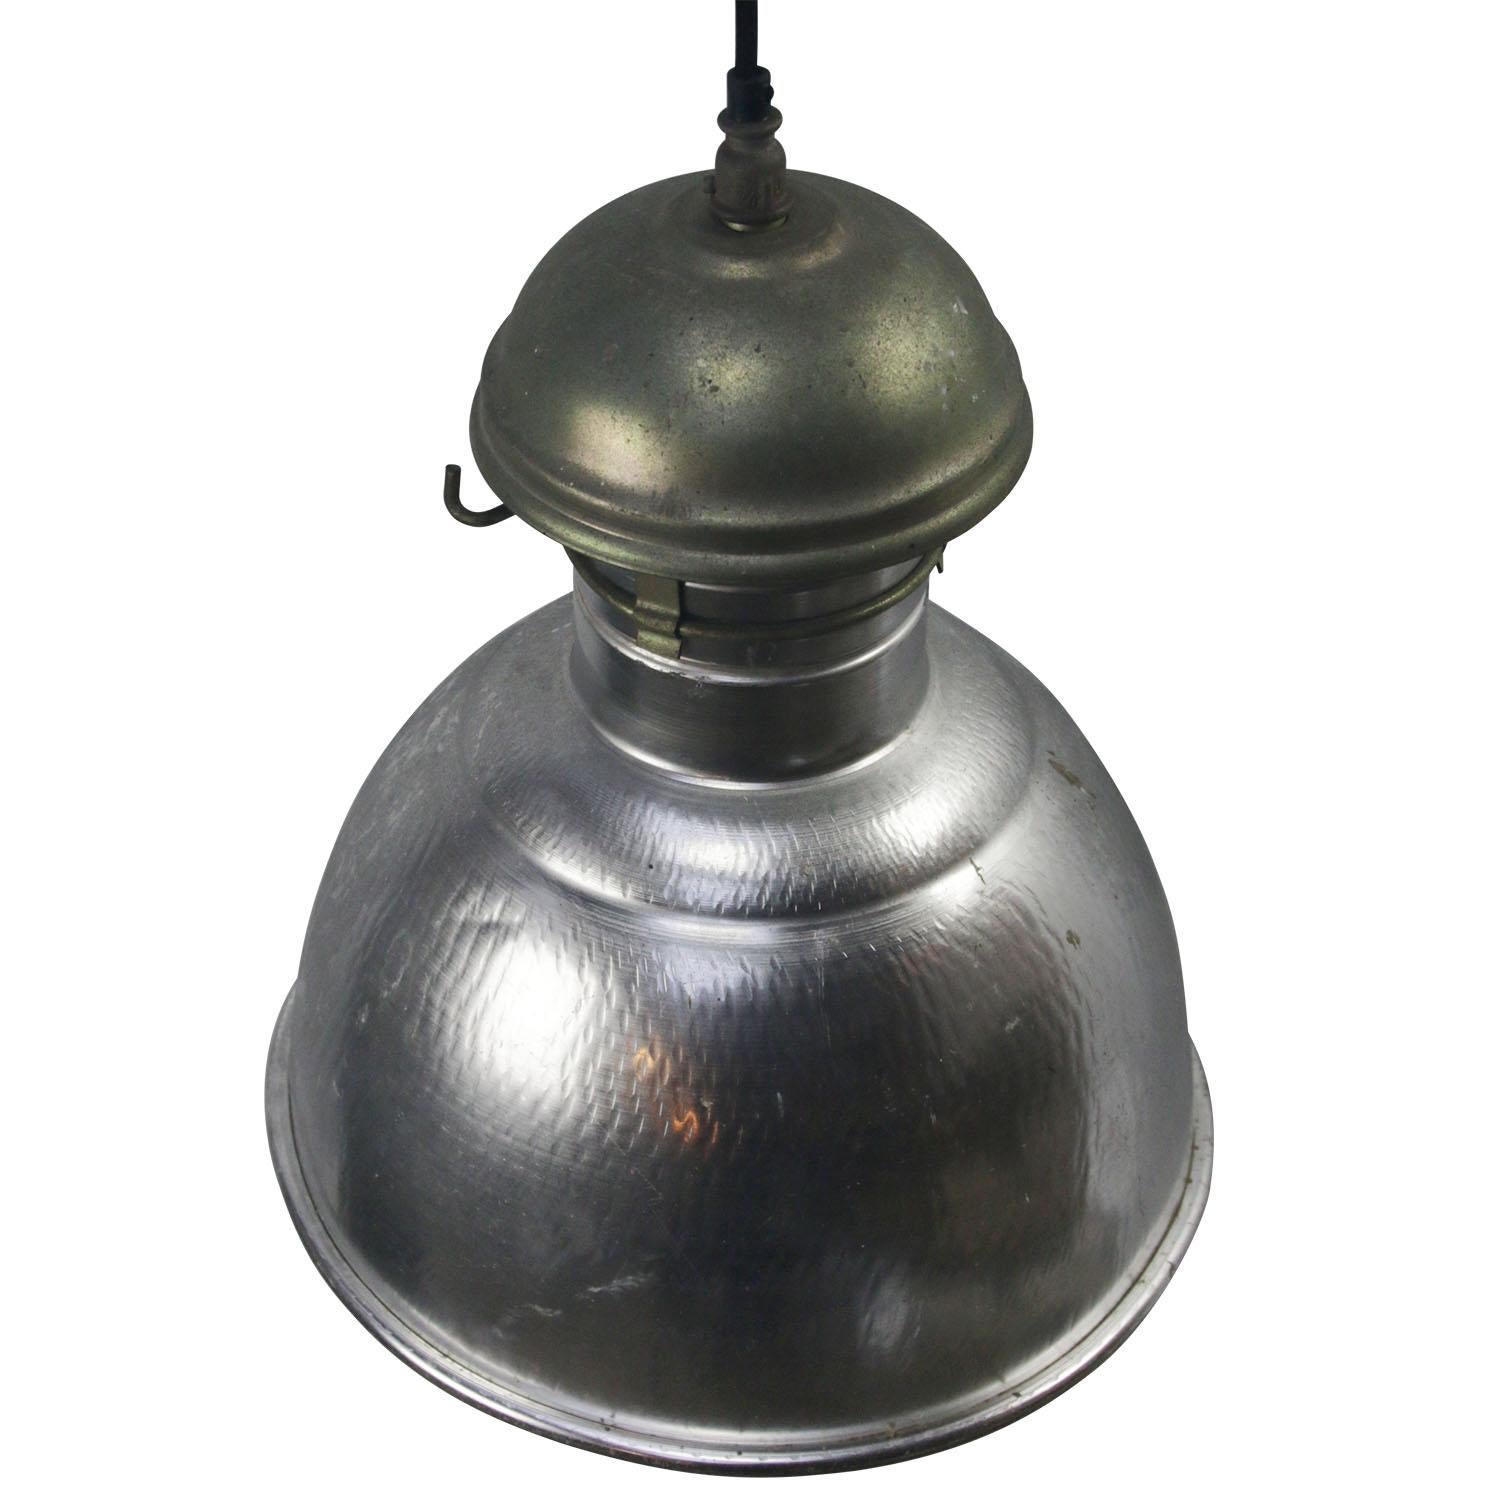 French vintage industrial street lamp
Silver aluminium with metal top

Weight 1.10 kg / 2.4 lb

Priced per individual item. All lamps have been made suitable by international standards for incandescent light bulbs, energy-efficient and LED